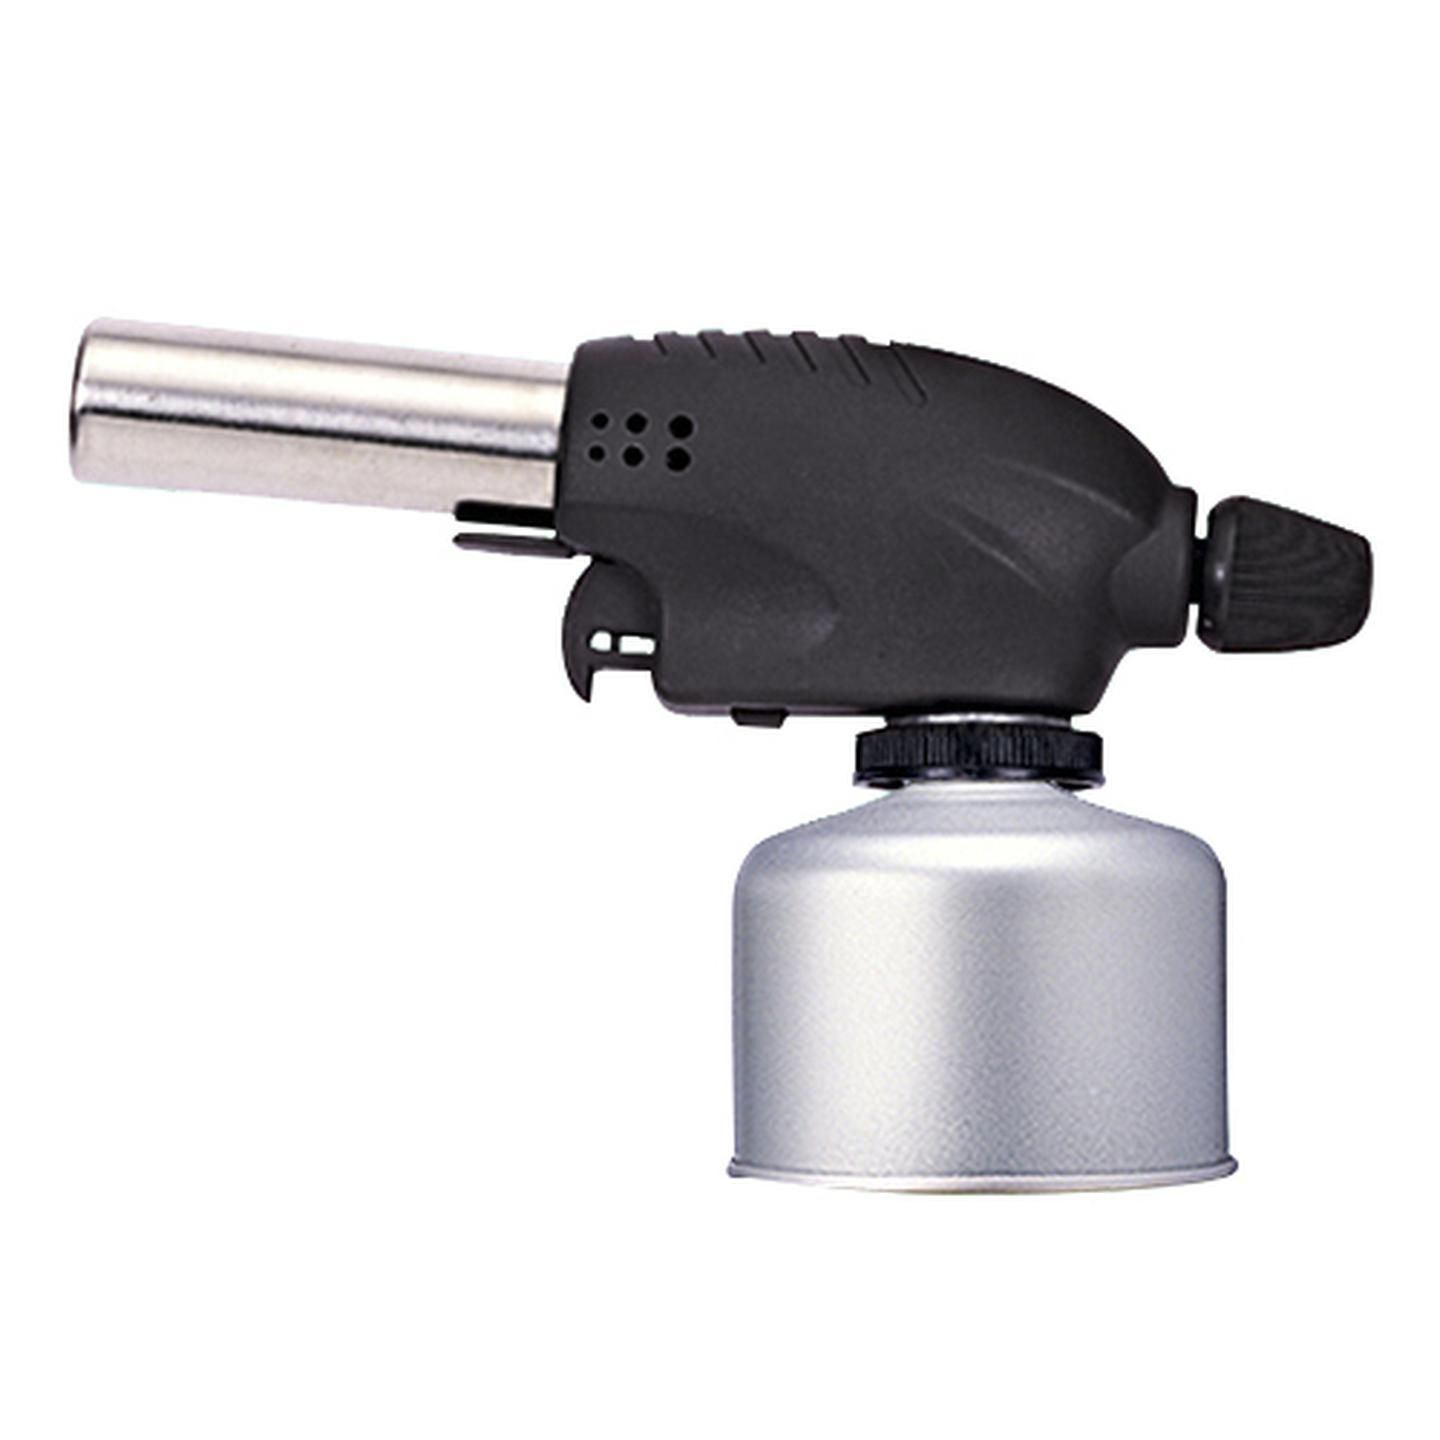 Gas Can Blow torch Attachment